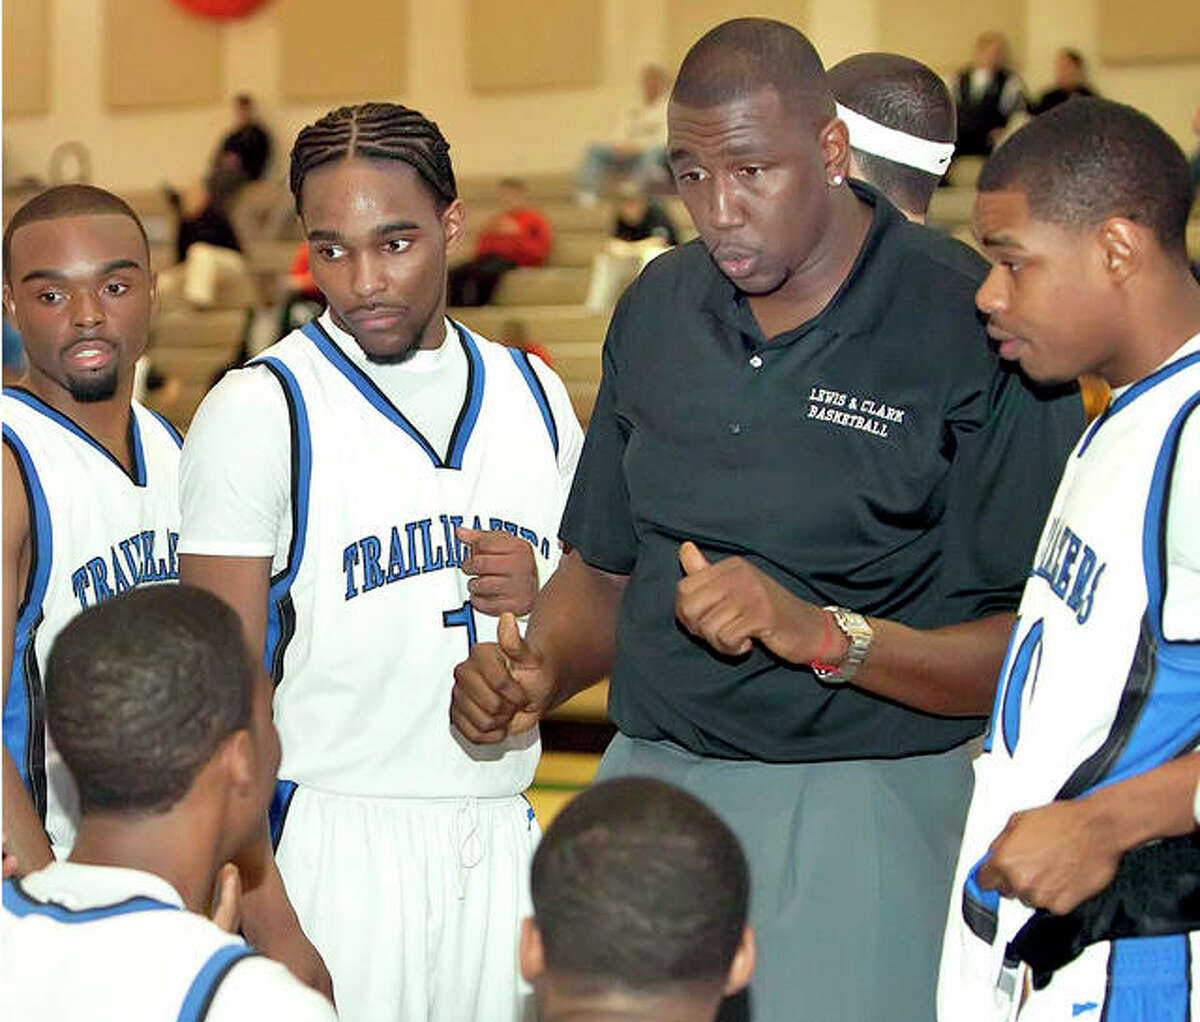 Then-LCCC Deon Thomas talks strategies with his Trailblazers at the 2010 NJCAA Division II Men’s National Basketball Tournament in Danville. LCCC went on to finish fourth.